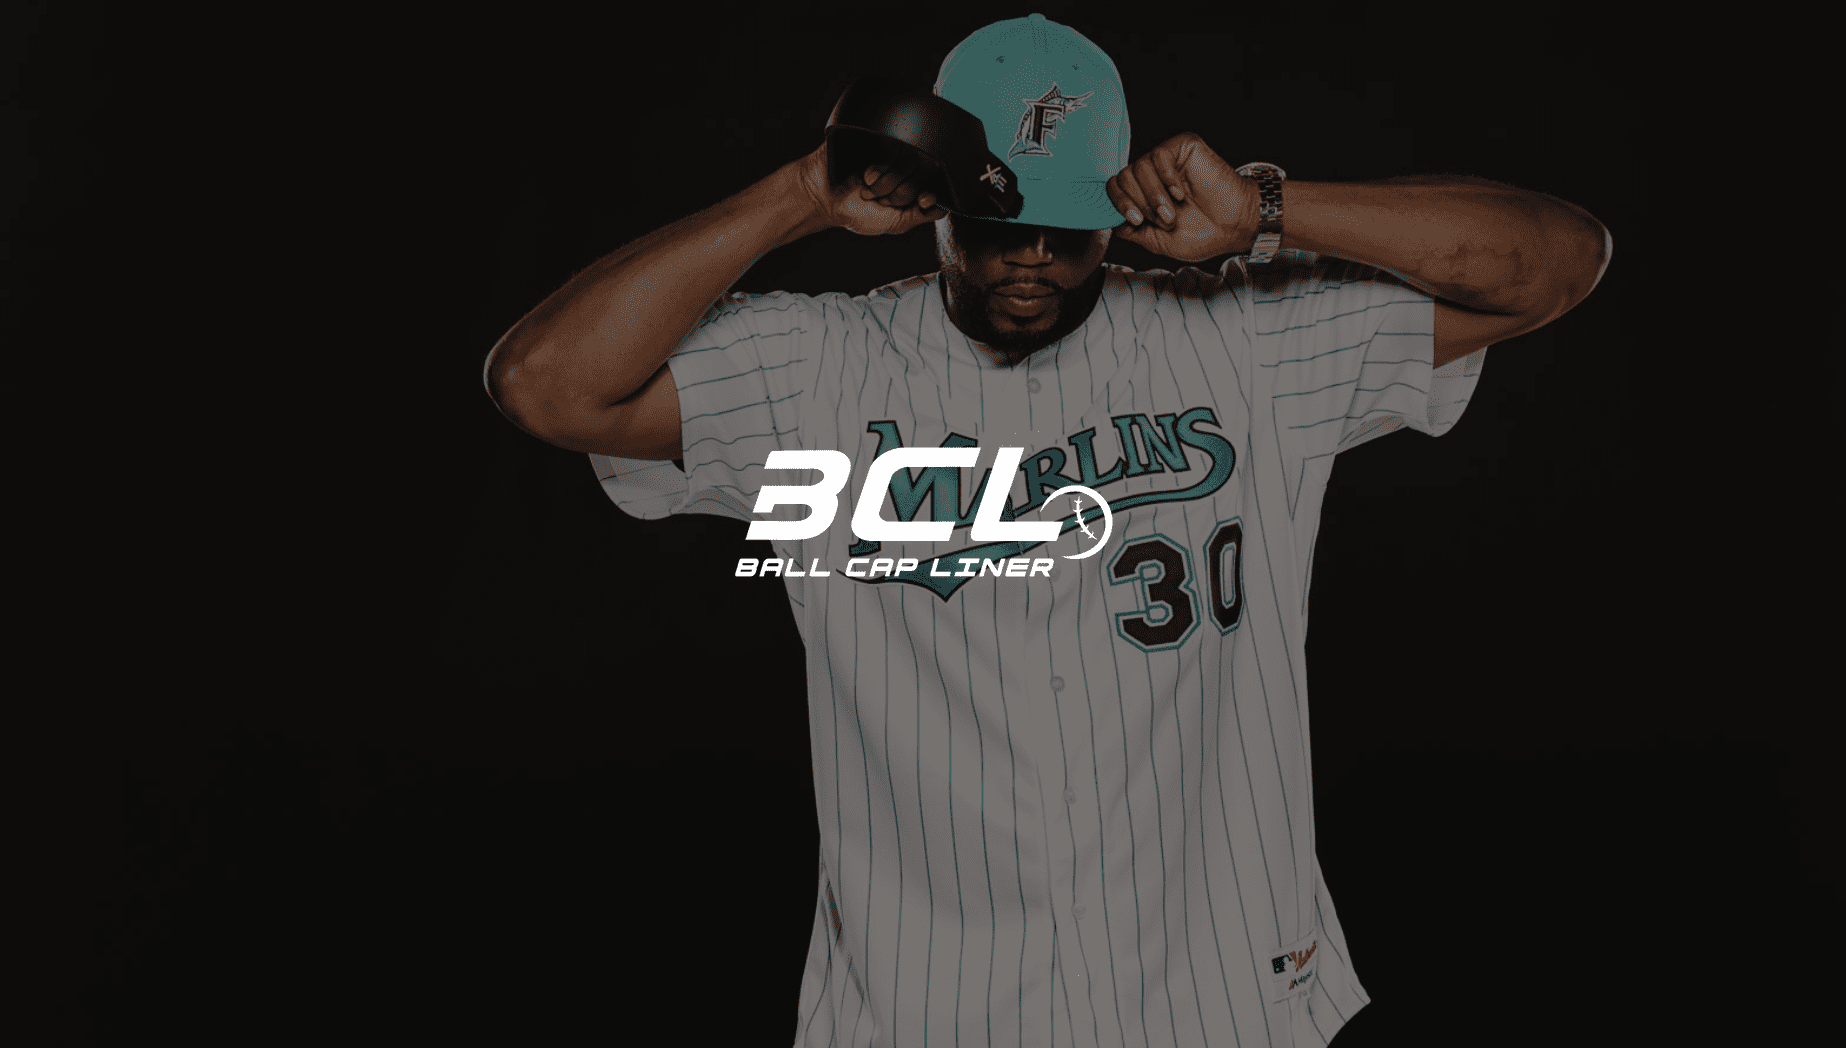 White BCL Ball Cap Liner logo against an African American man wearing a Marlins jersey and cap posing for the camera looking down adjusting his cap